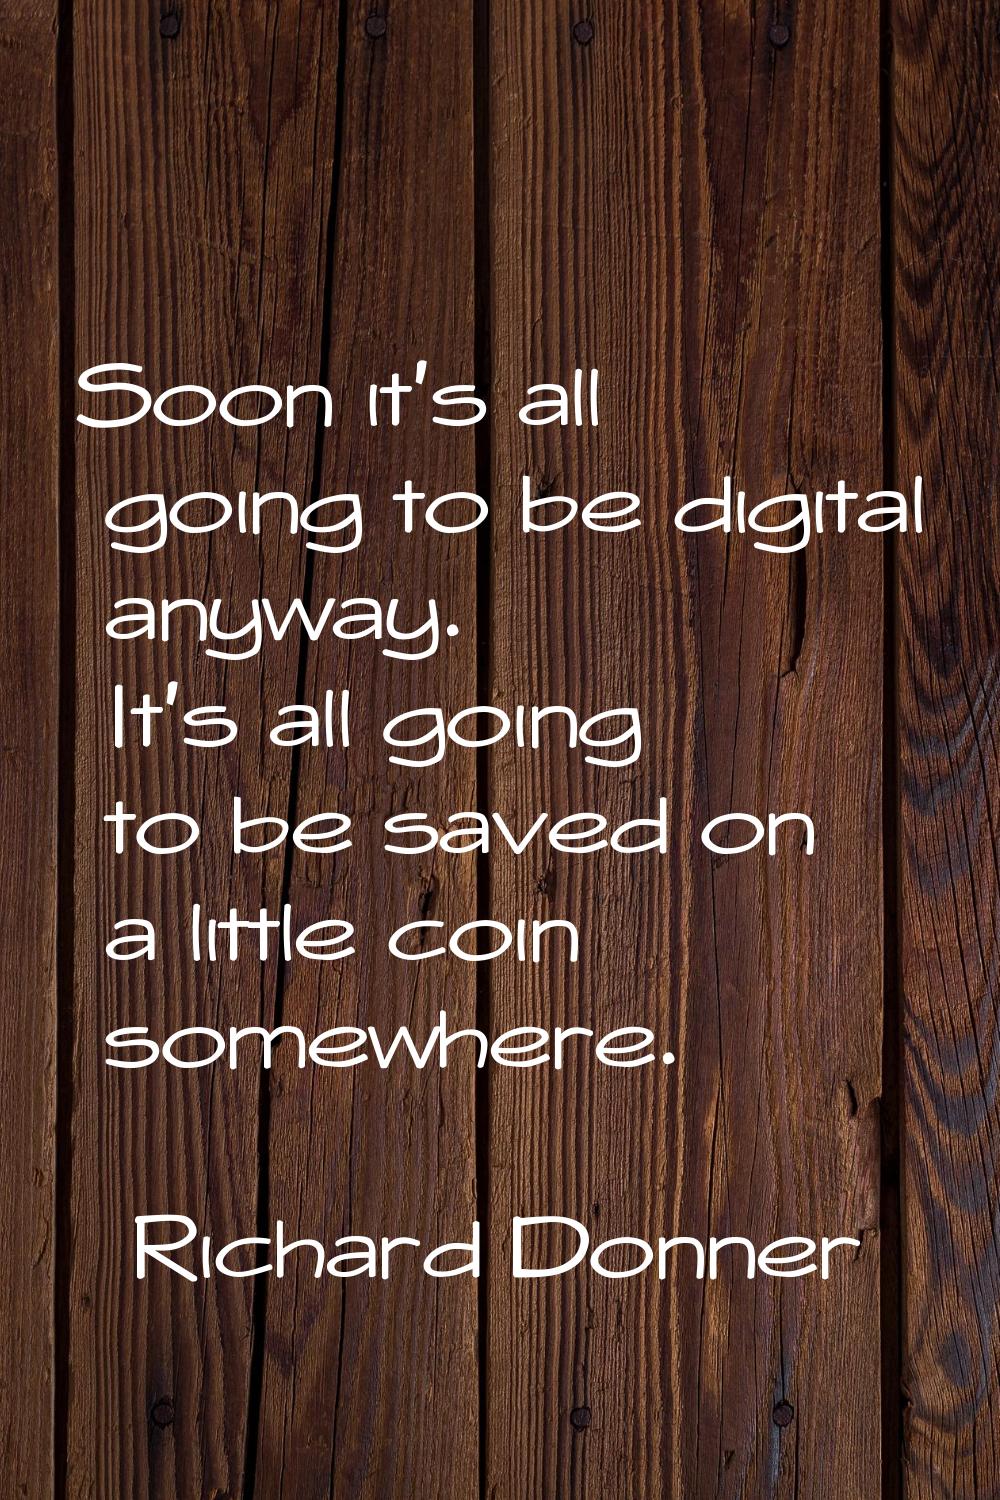 Soon it's all going to be digital anyway. It's all going to be saved on a little coin somewhere.